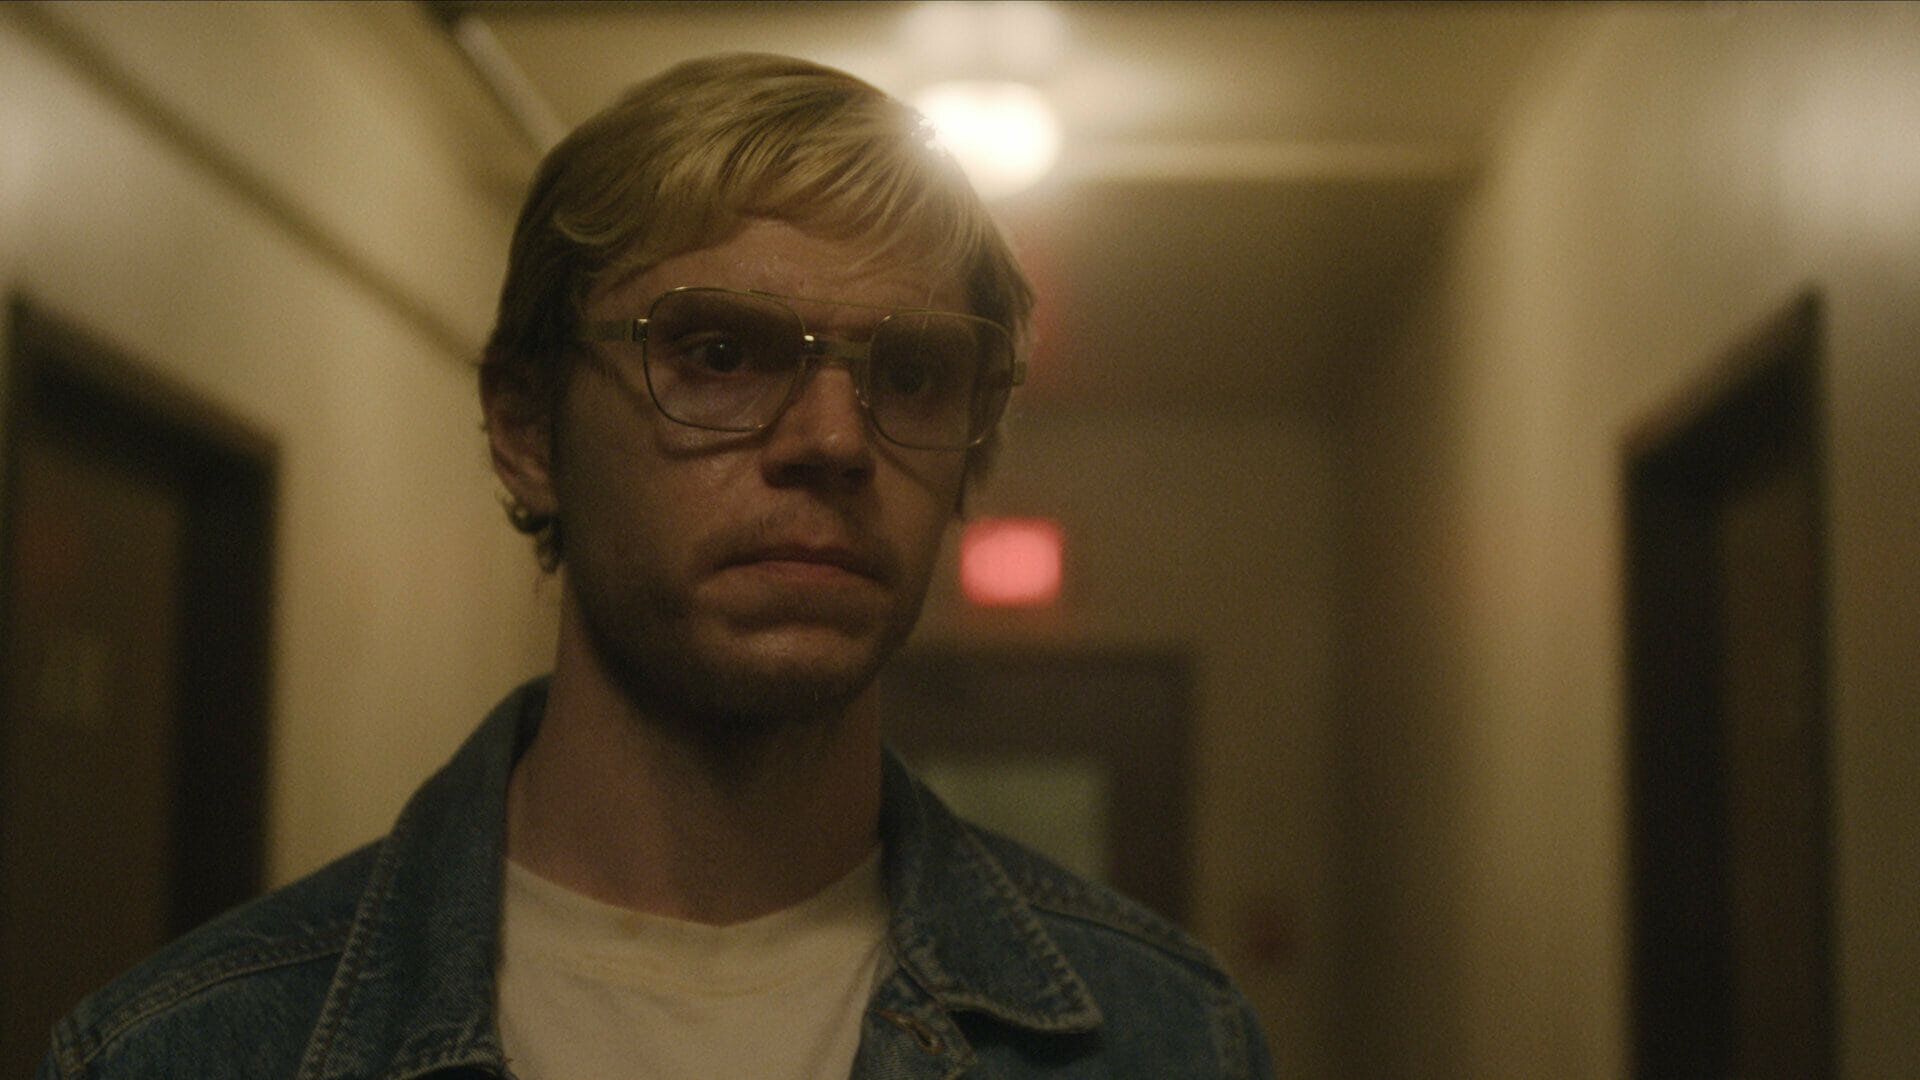 Dahmer - Monster: The Jeffrey Dahmer Story background